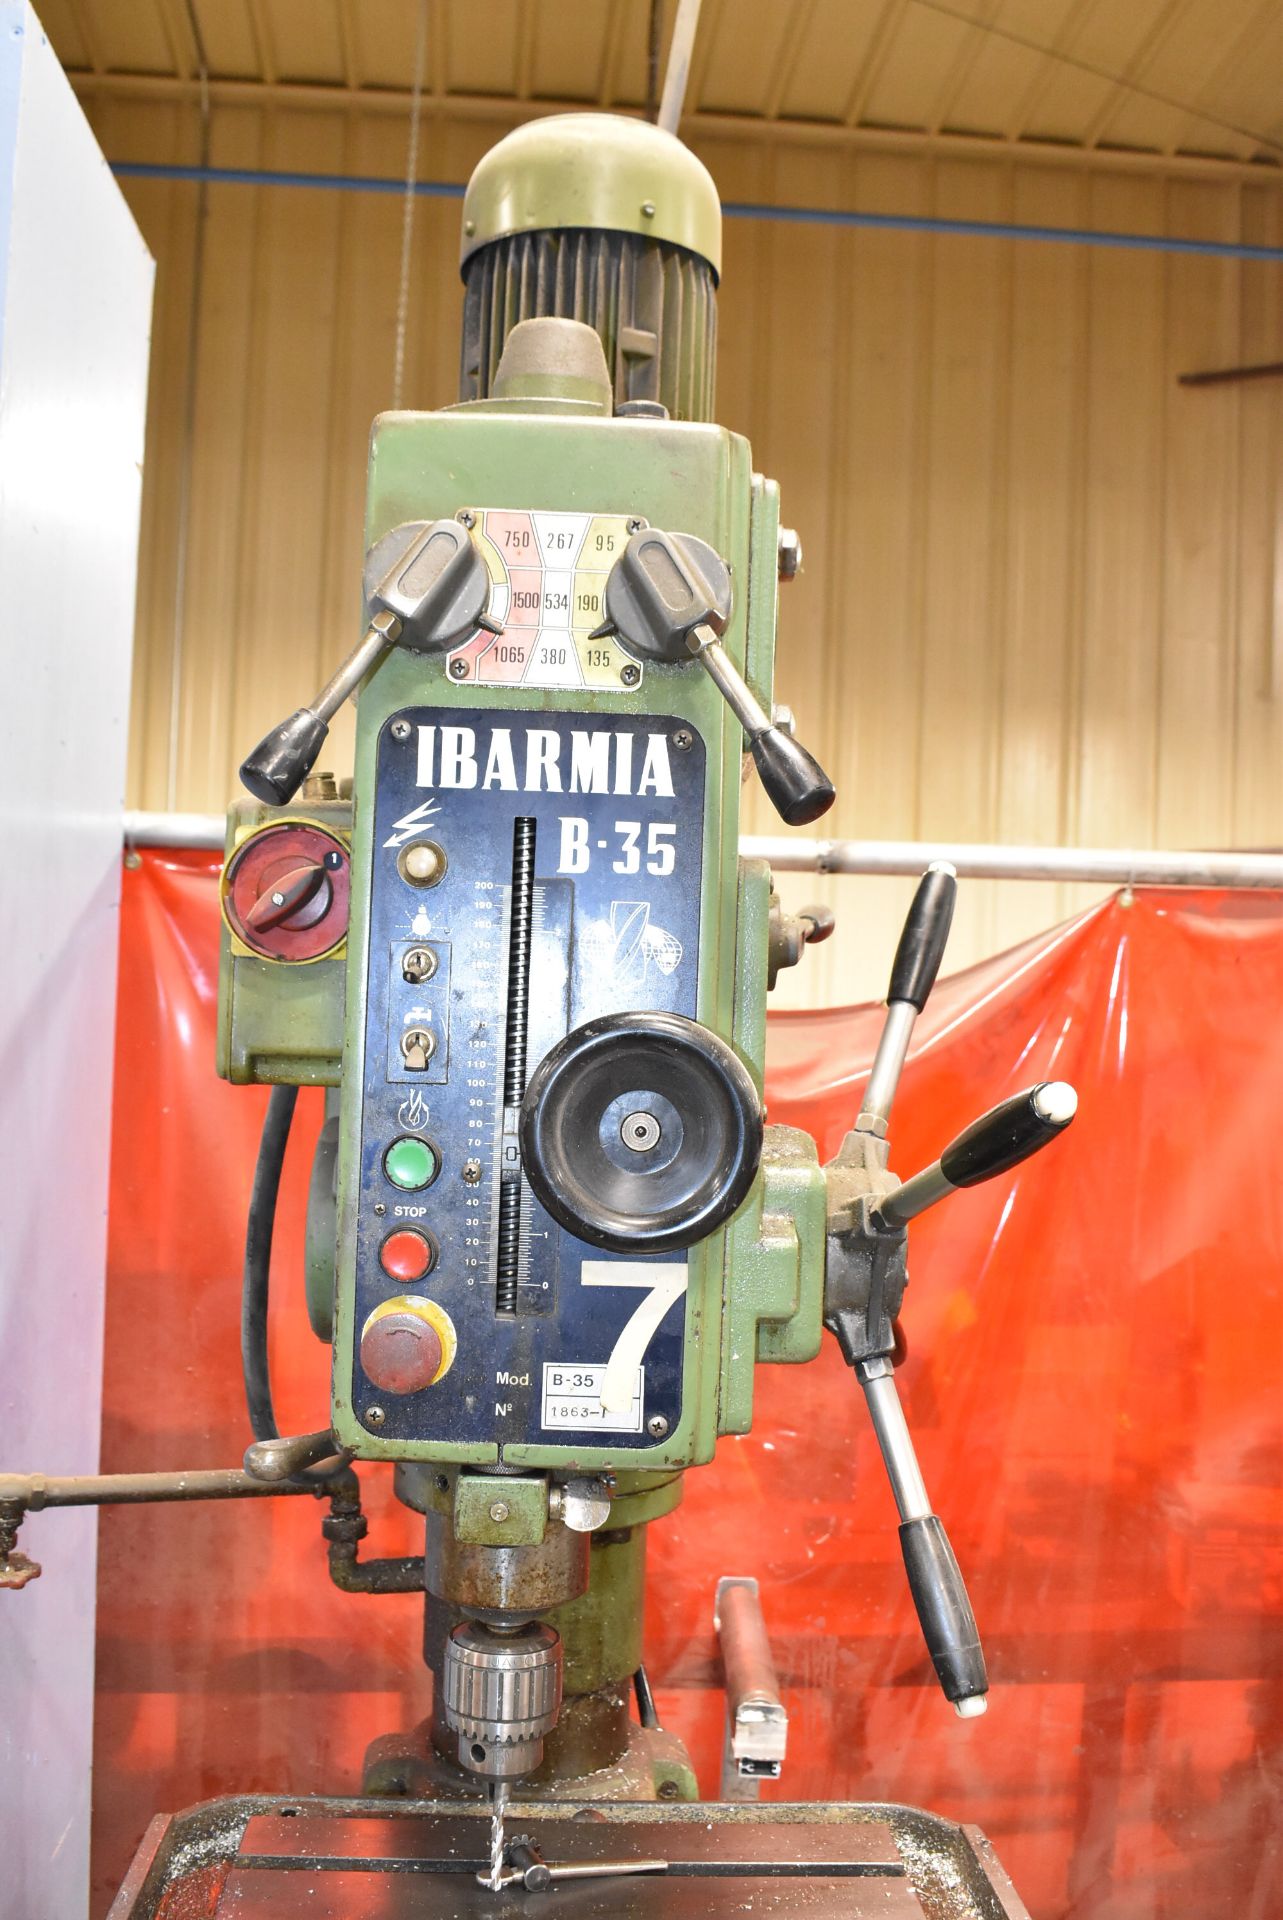 IBARMIA B-35 GEAR HEAD DRILL WITH SPEEDS TO 1500RPM, COOLANT, 17" X 15" T-SLOT TABLE, S/N 1863-1. ( - Image 2 of 9